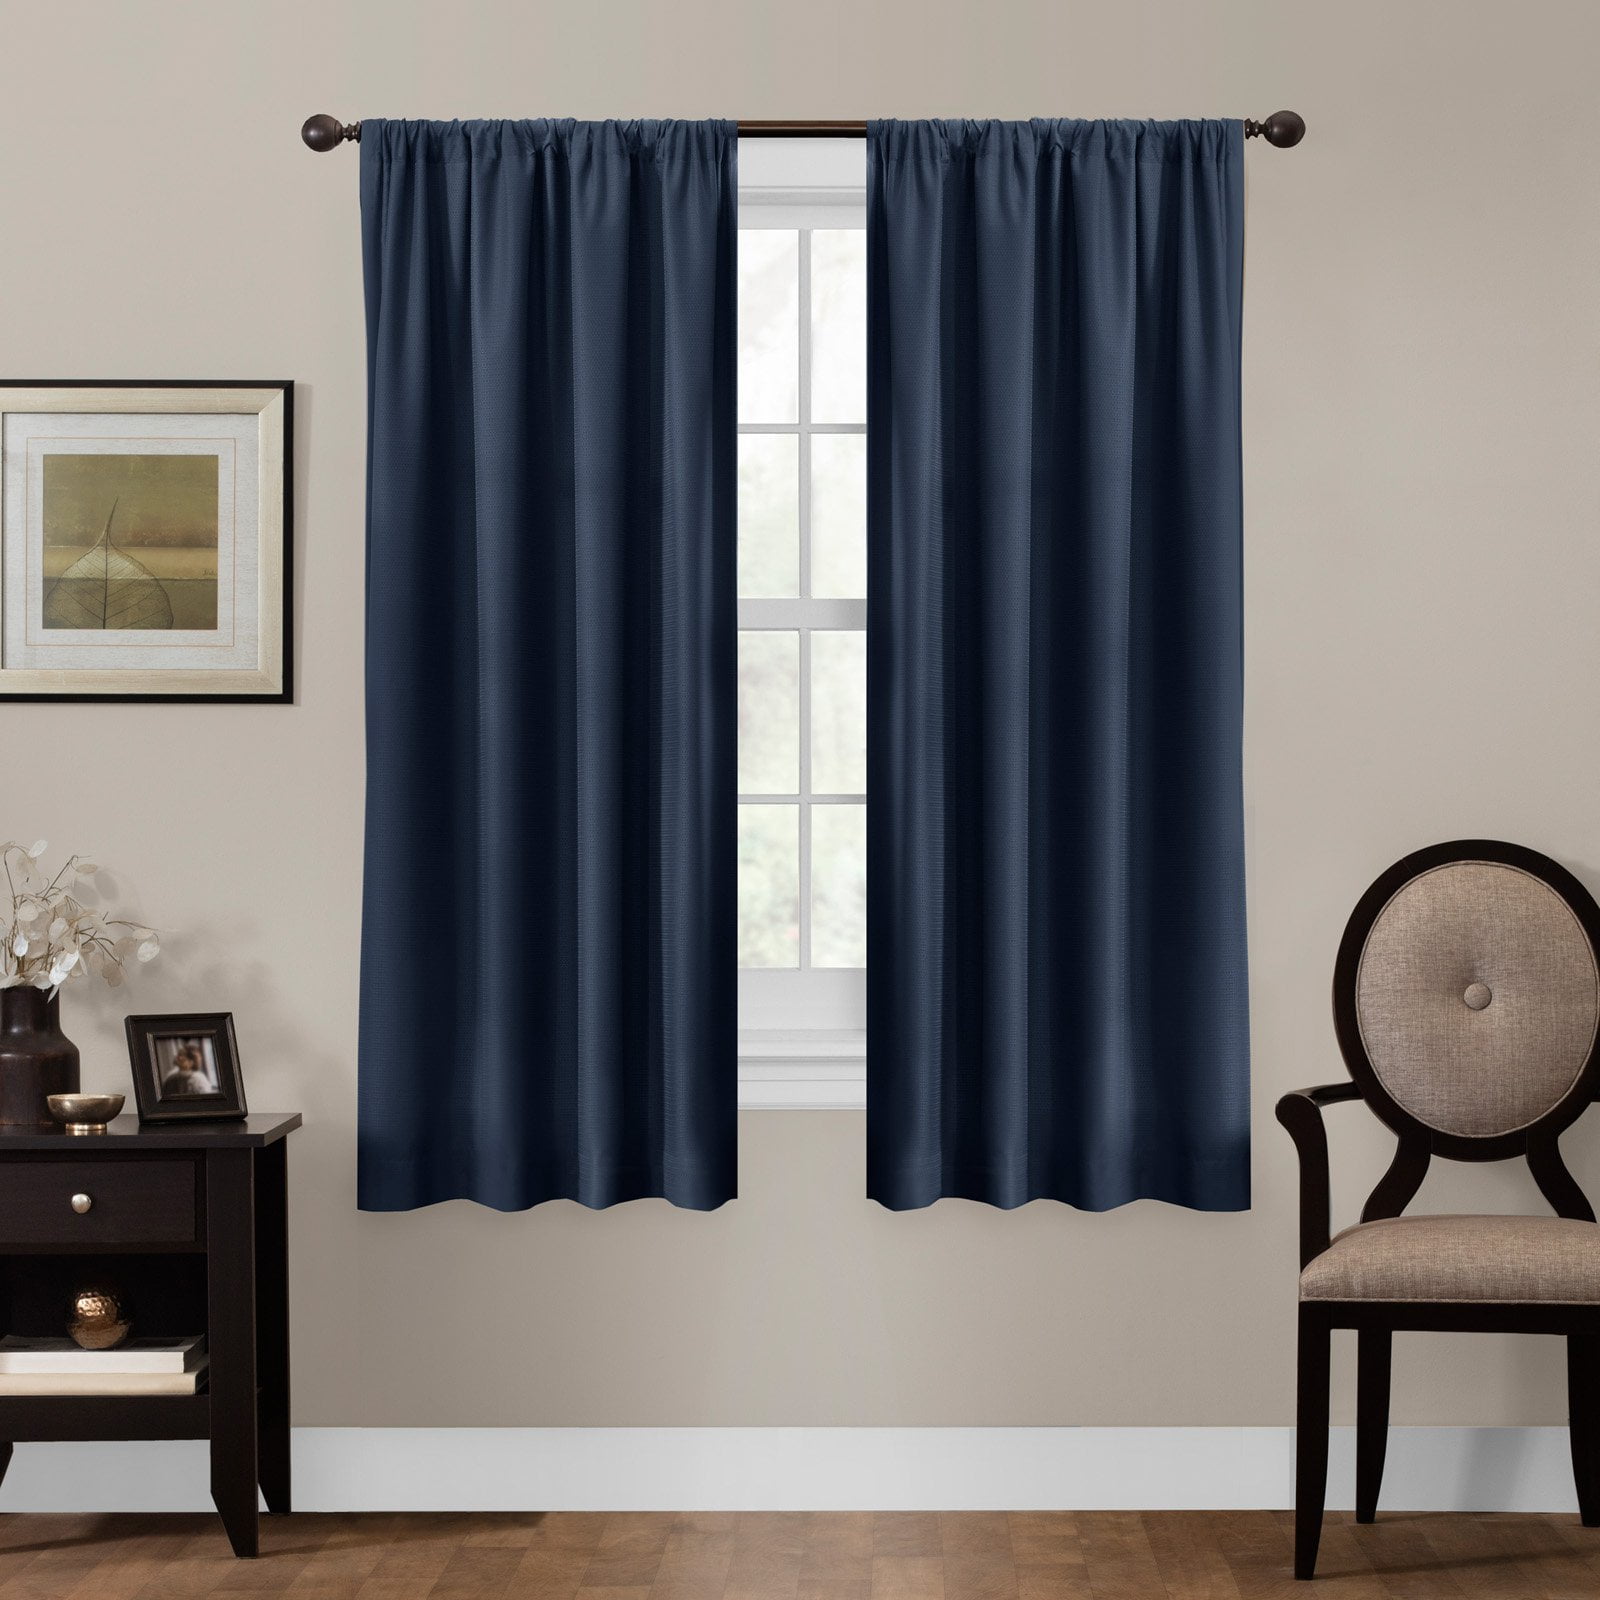 1 Set Light Filtering 100% Privacy Lined Blackout Window Curtains N32 Navy Blue 